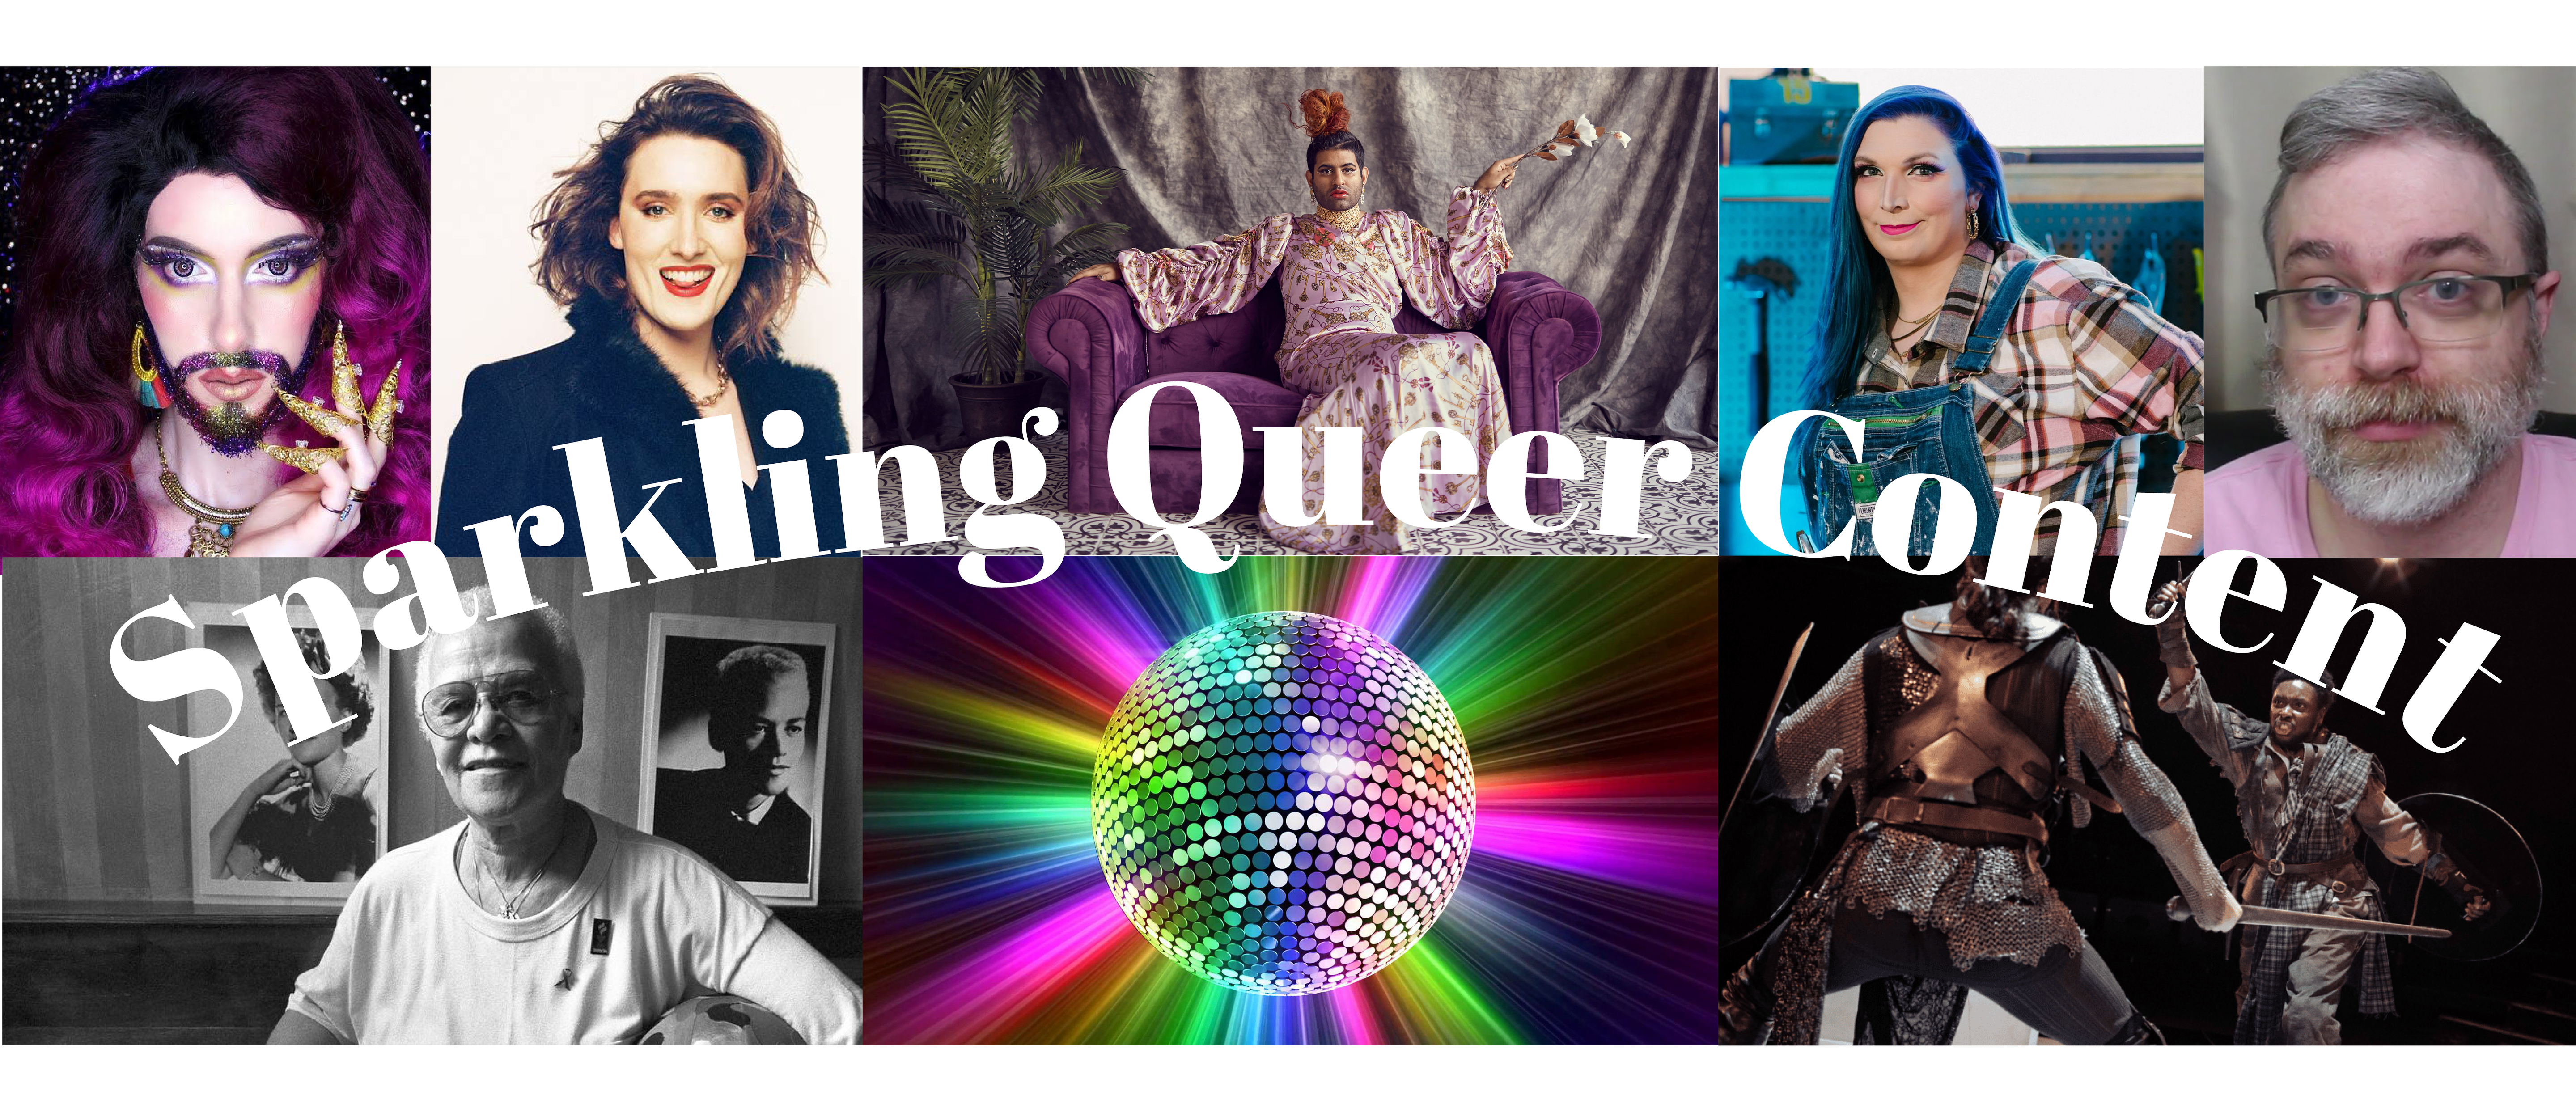 Compilation of images of various creators and queers with the text Sparkling Queer Content over top. Photos from left to right, top to bottom: Natalie Winn of Contrapoints, Abigail Thorn of PhilosophyTube, Alok Menon, Mercury Stardust, Rantasmo of Needs More Gay, Stormé DeLarverie, a disco ball against a rainbow background, and a scene from The Prince as it was filmed for Nebula. 